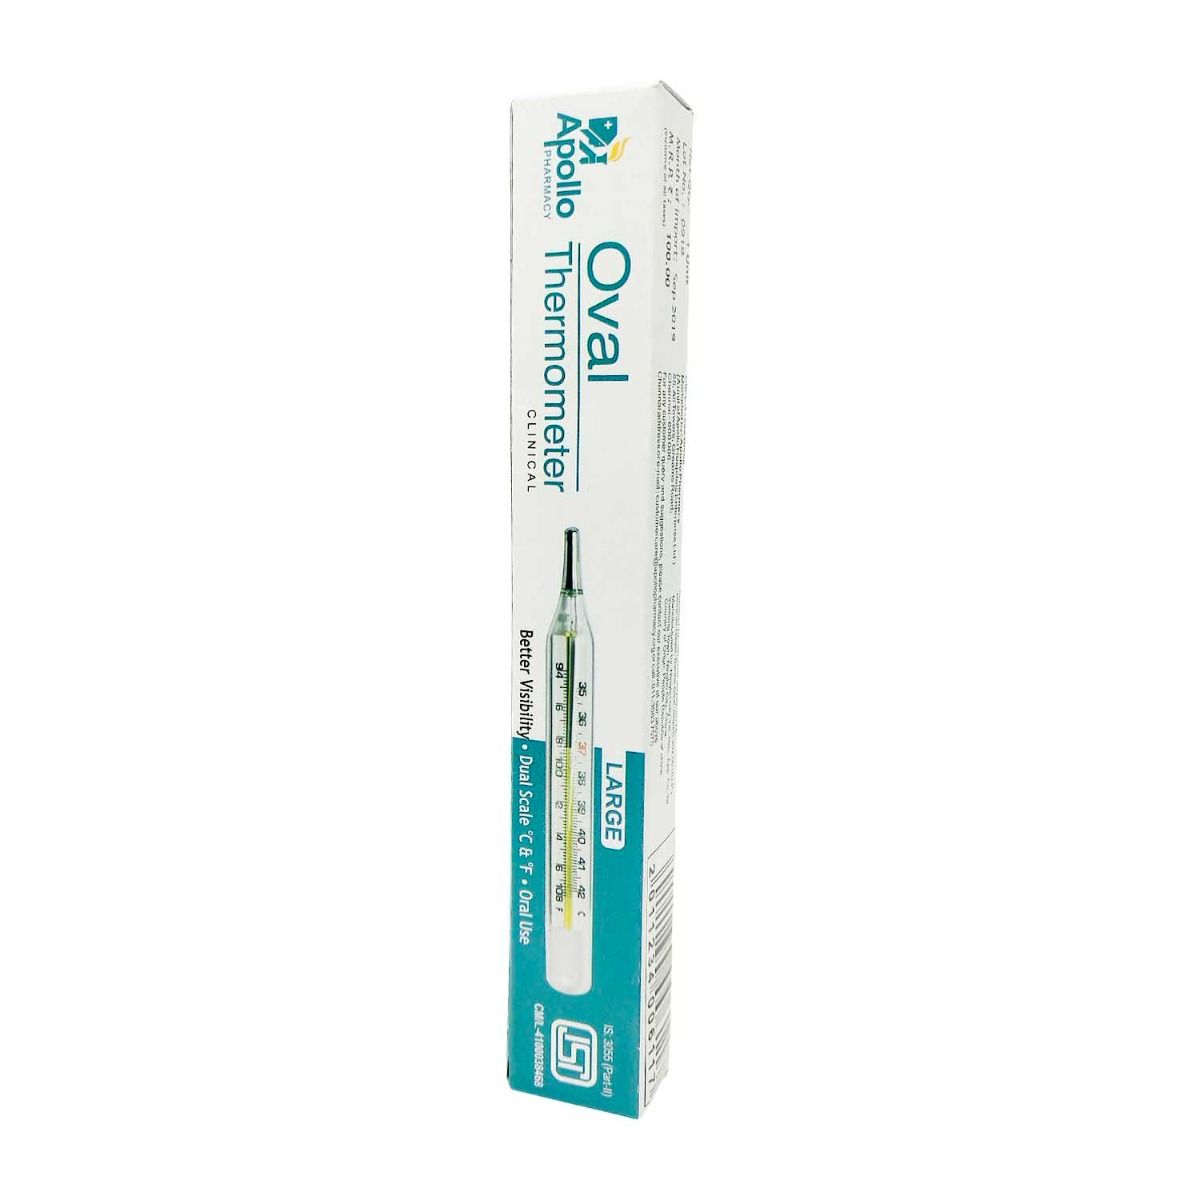 Buy Apollo Pharmacy Oval Thermometer Large, 1 Count Online